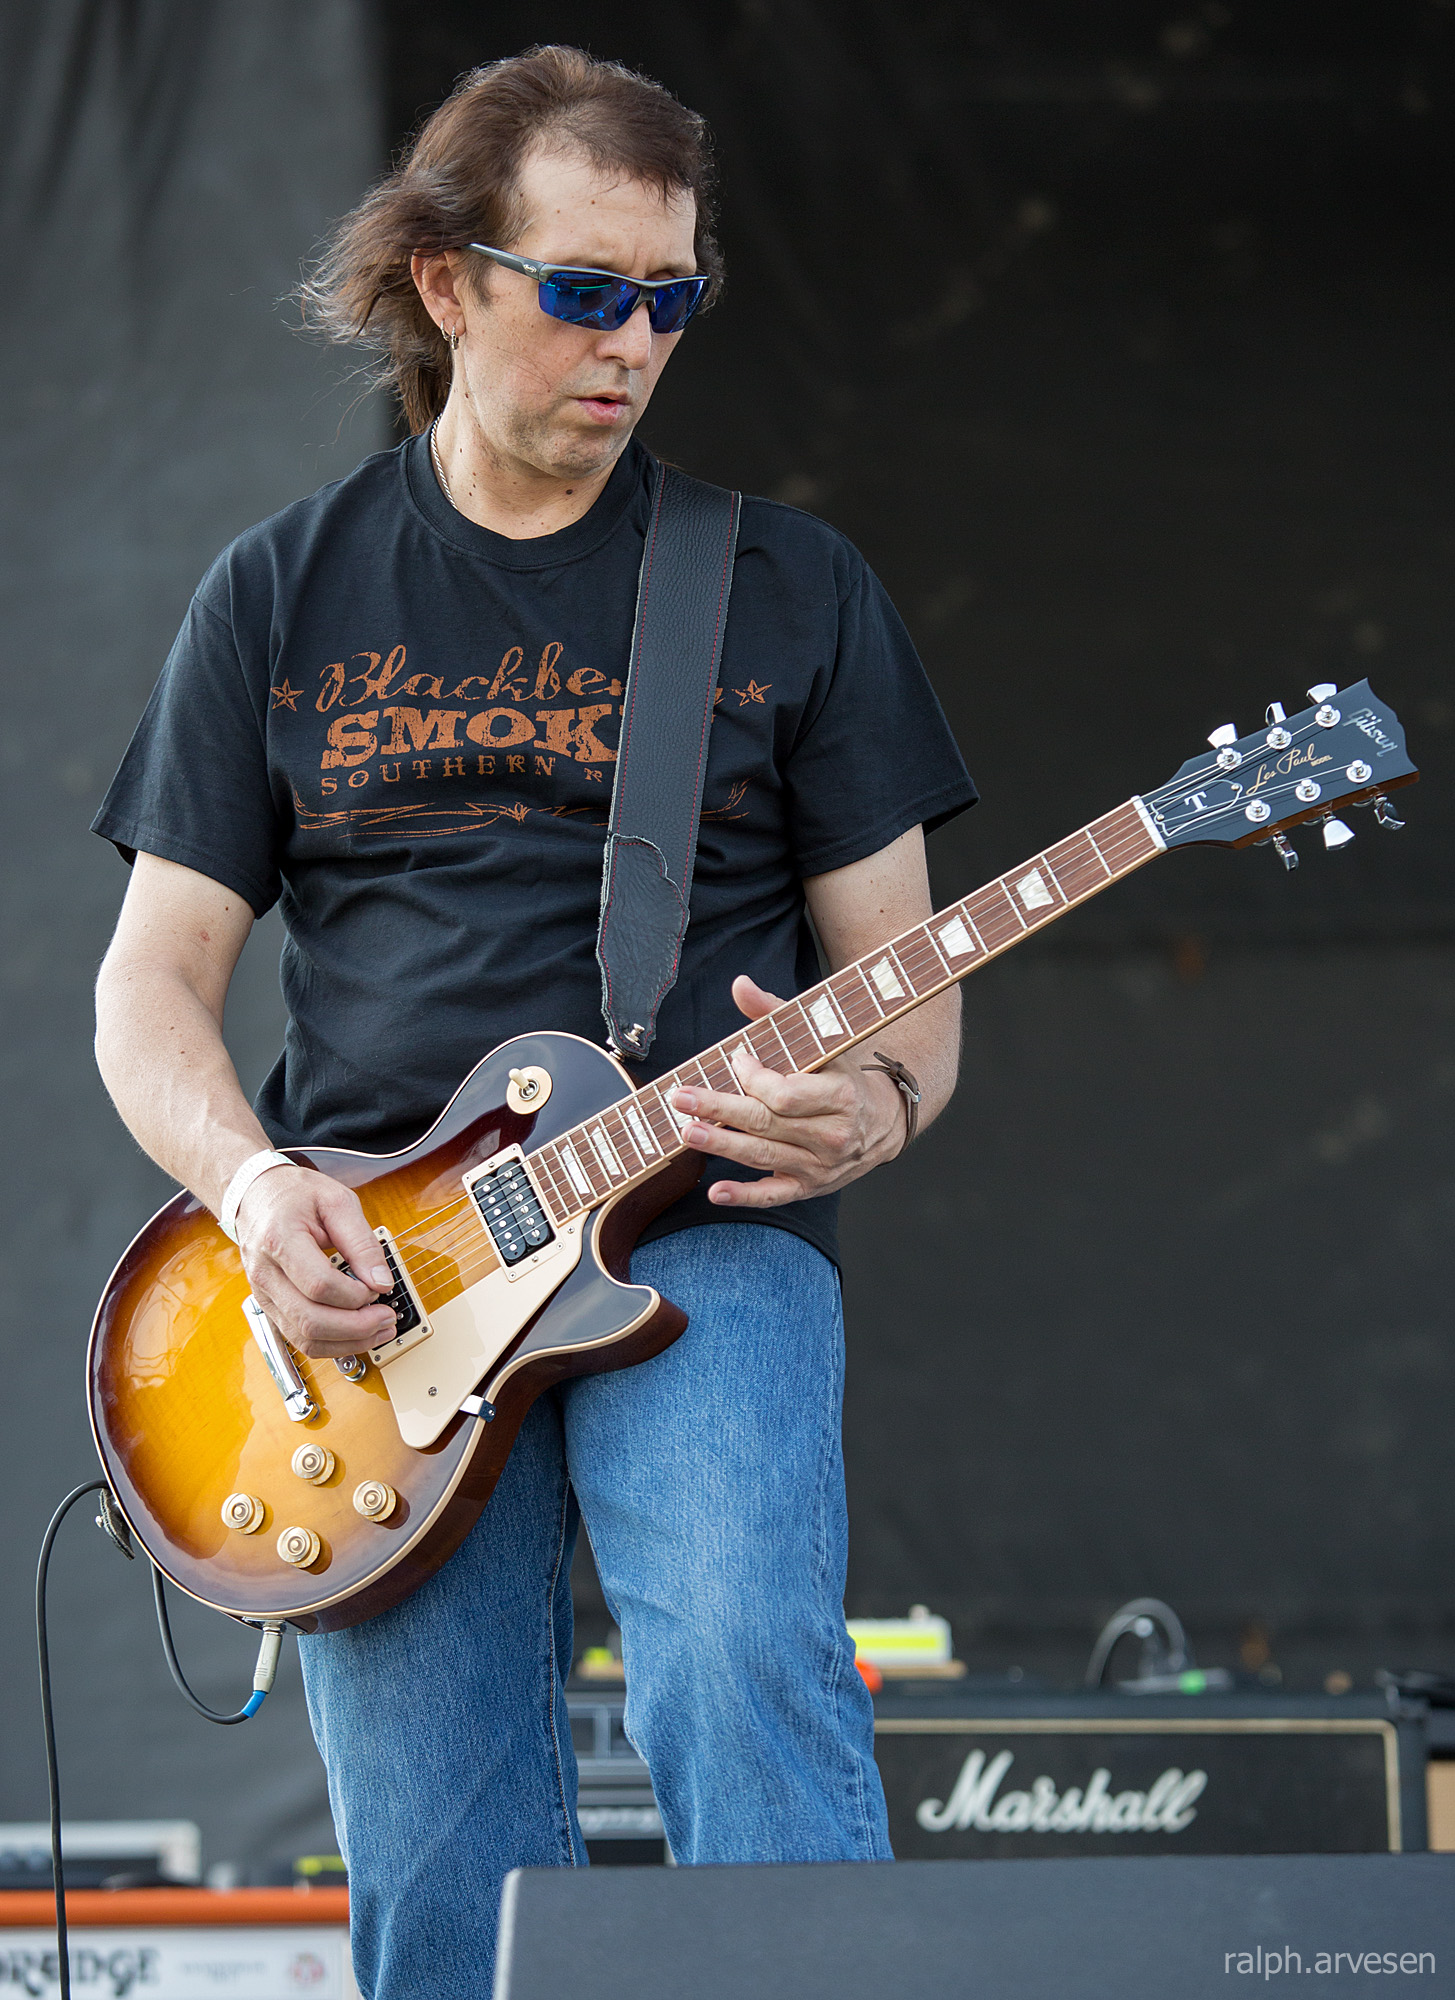 a man with sunglasses plays an electric guitar at an outdoor concert